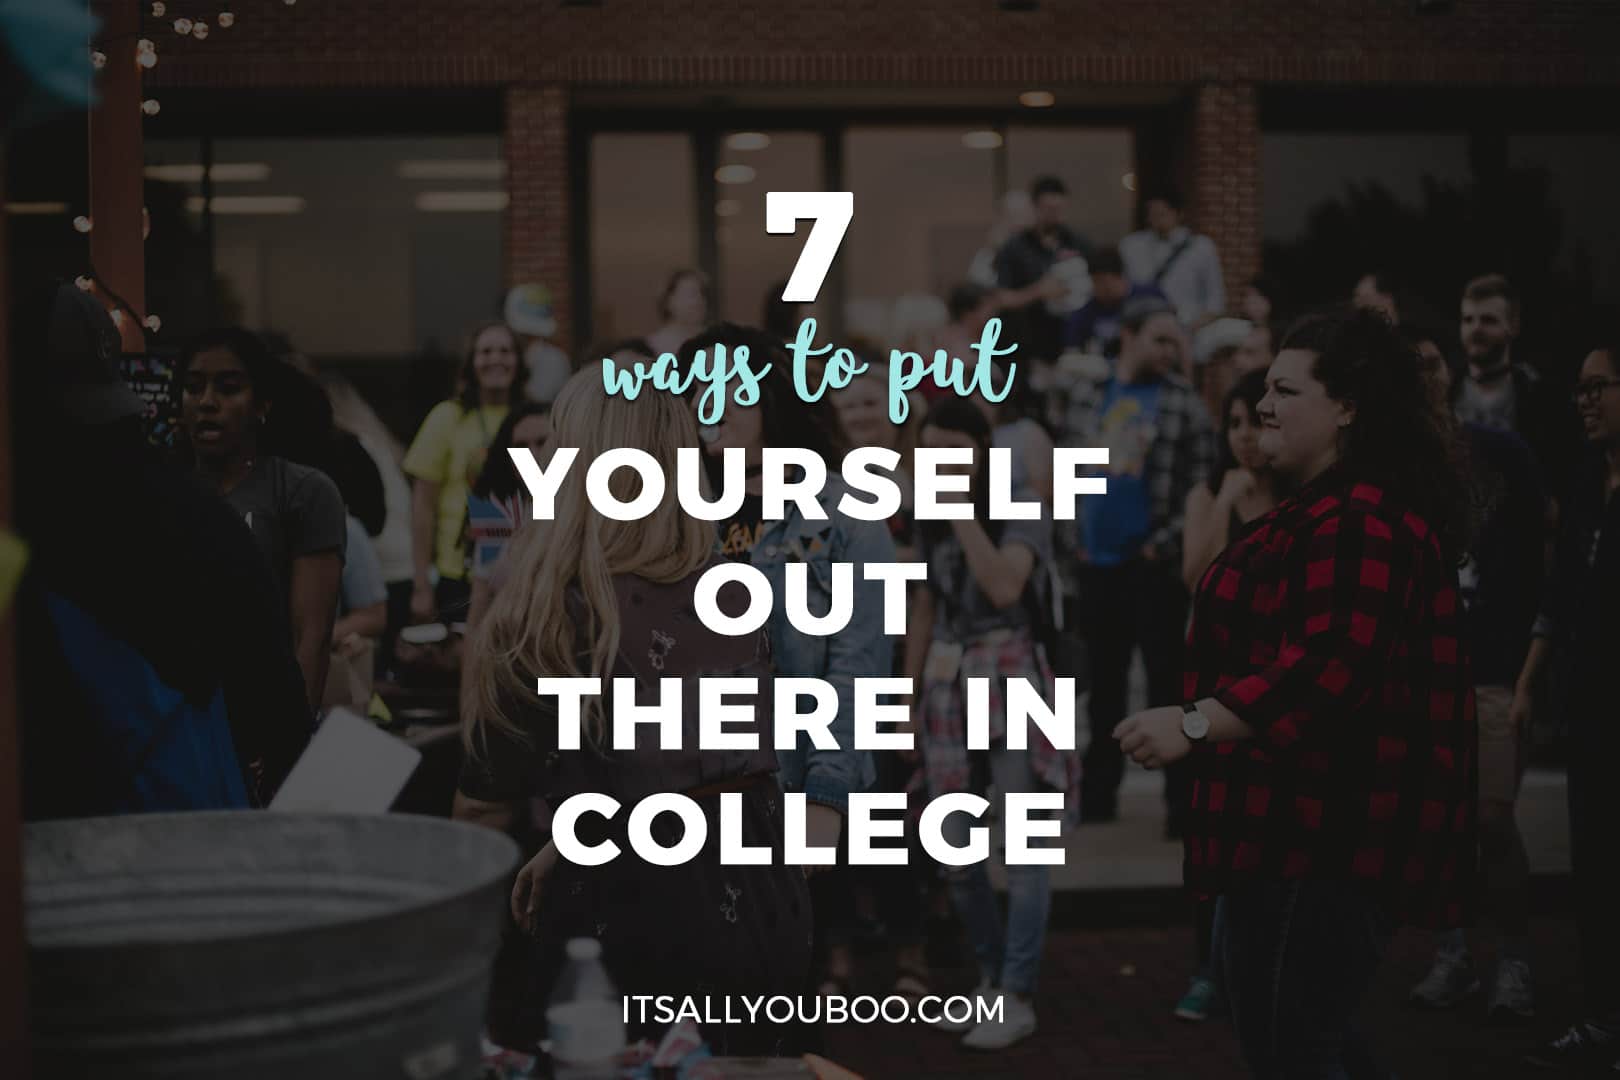 7 Ways to Put Yourself Out There in College